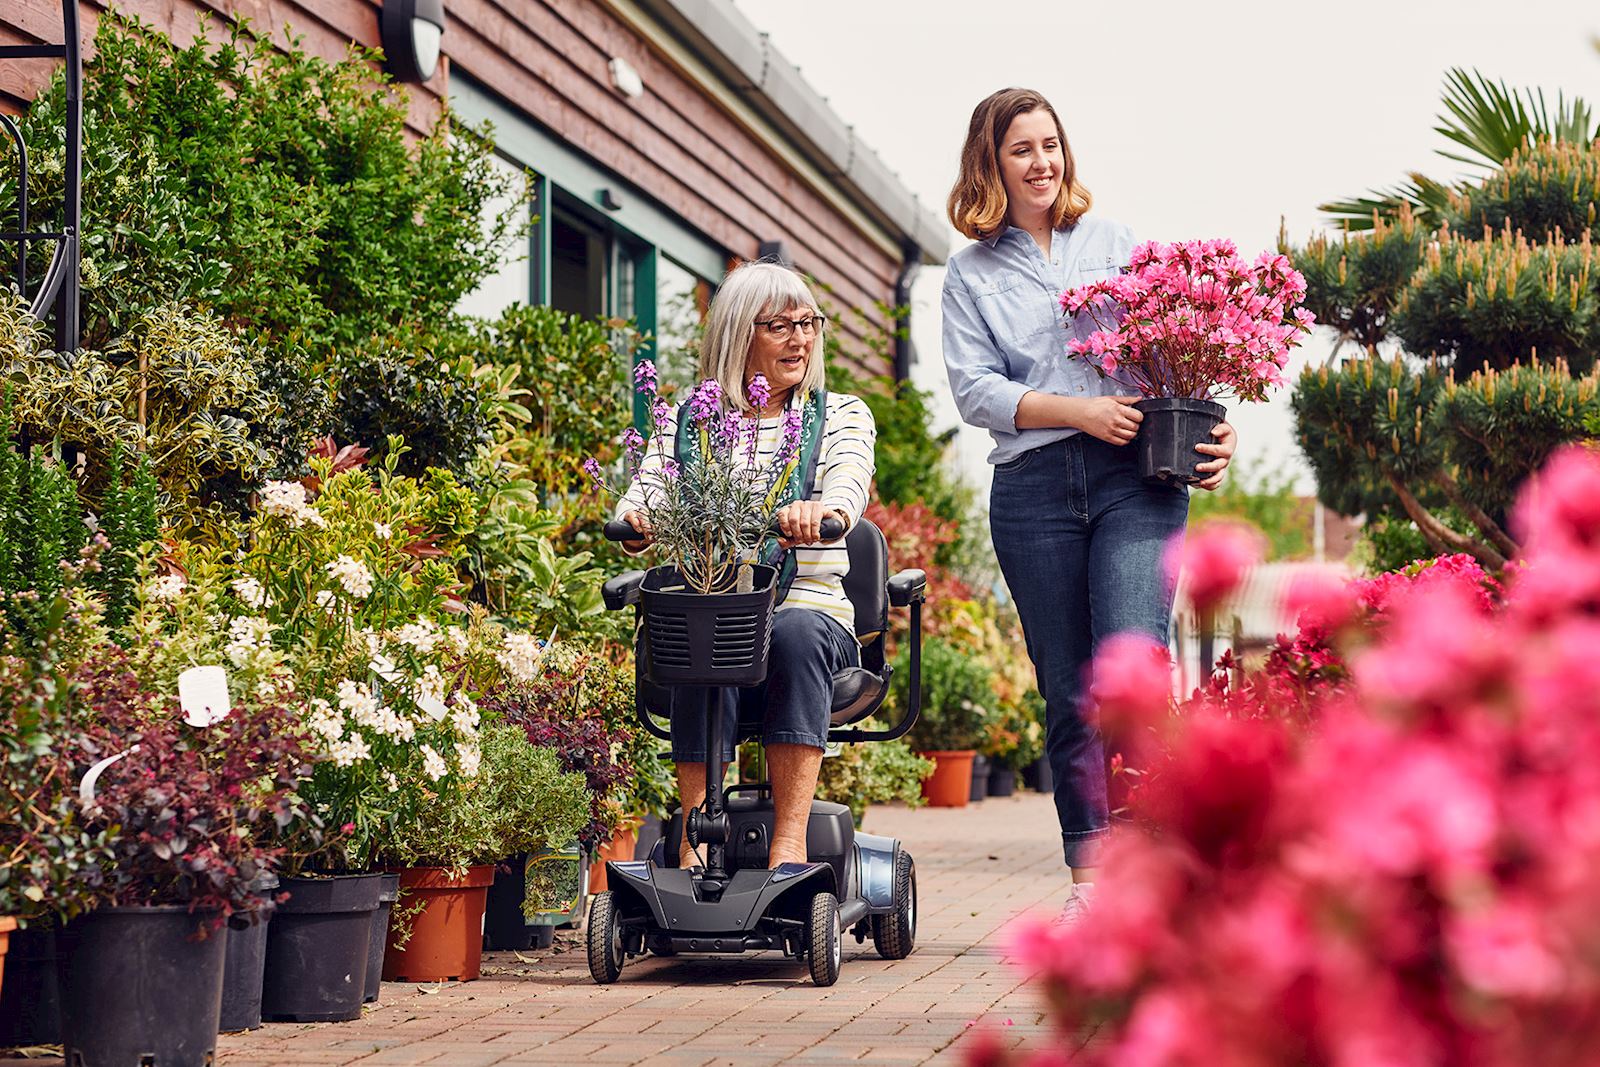 A lady riding a scooter alongside another lady carrying flowers